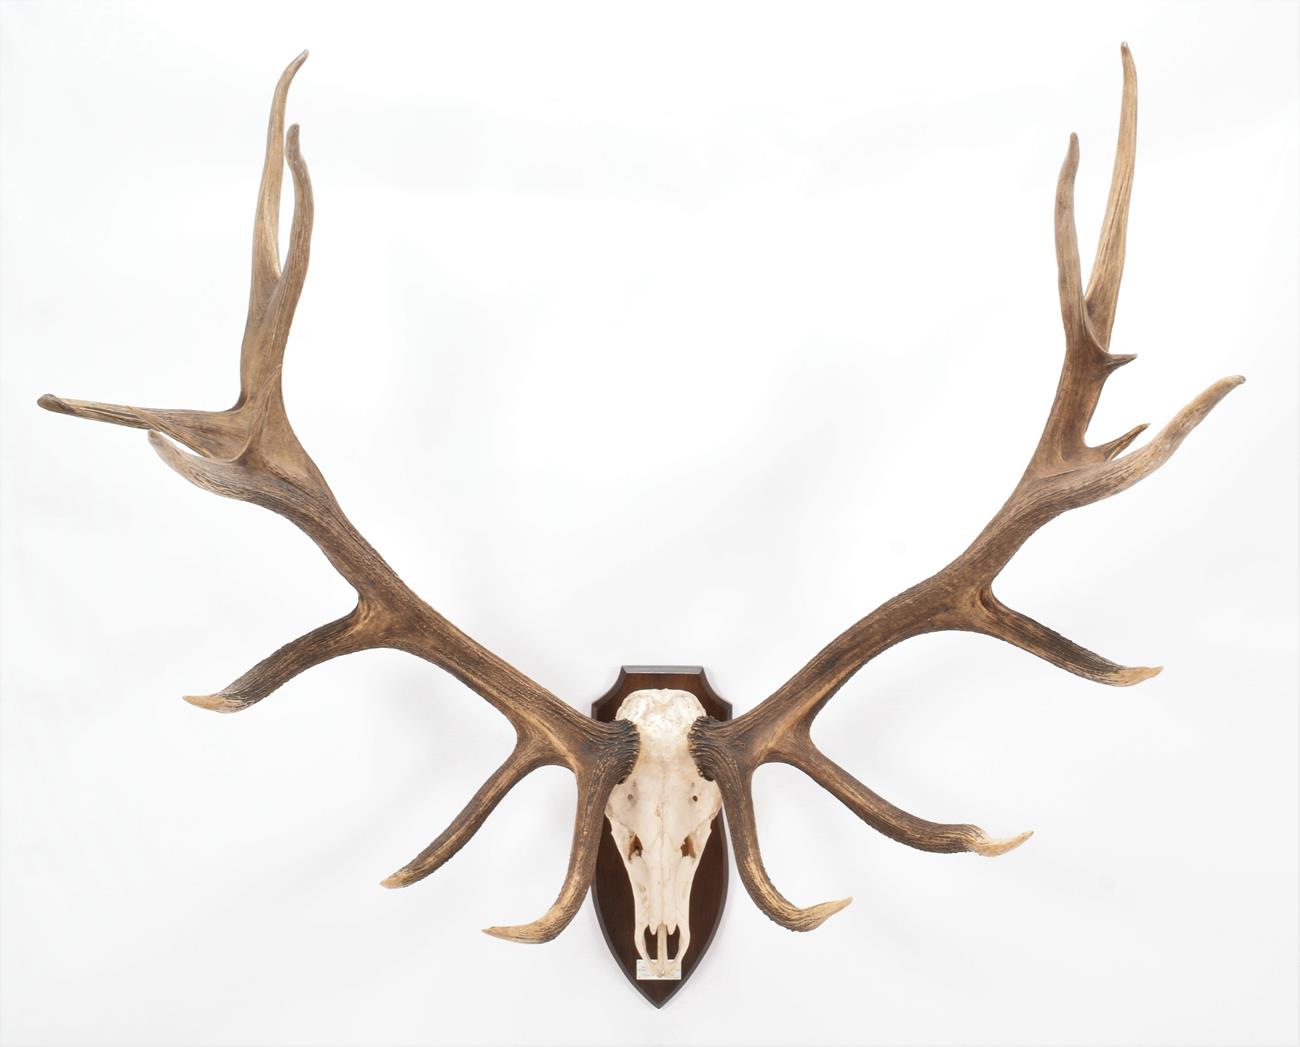 Lot 17 - Taxidermy: North American Wapiti or Elk (Cervus canadensis nelsoni), dated 1985, Howlett and...